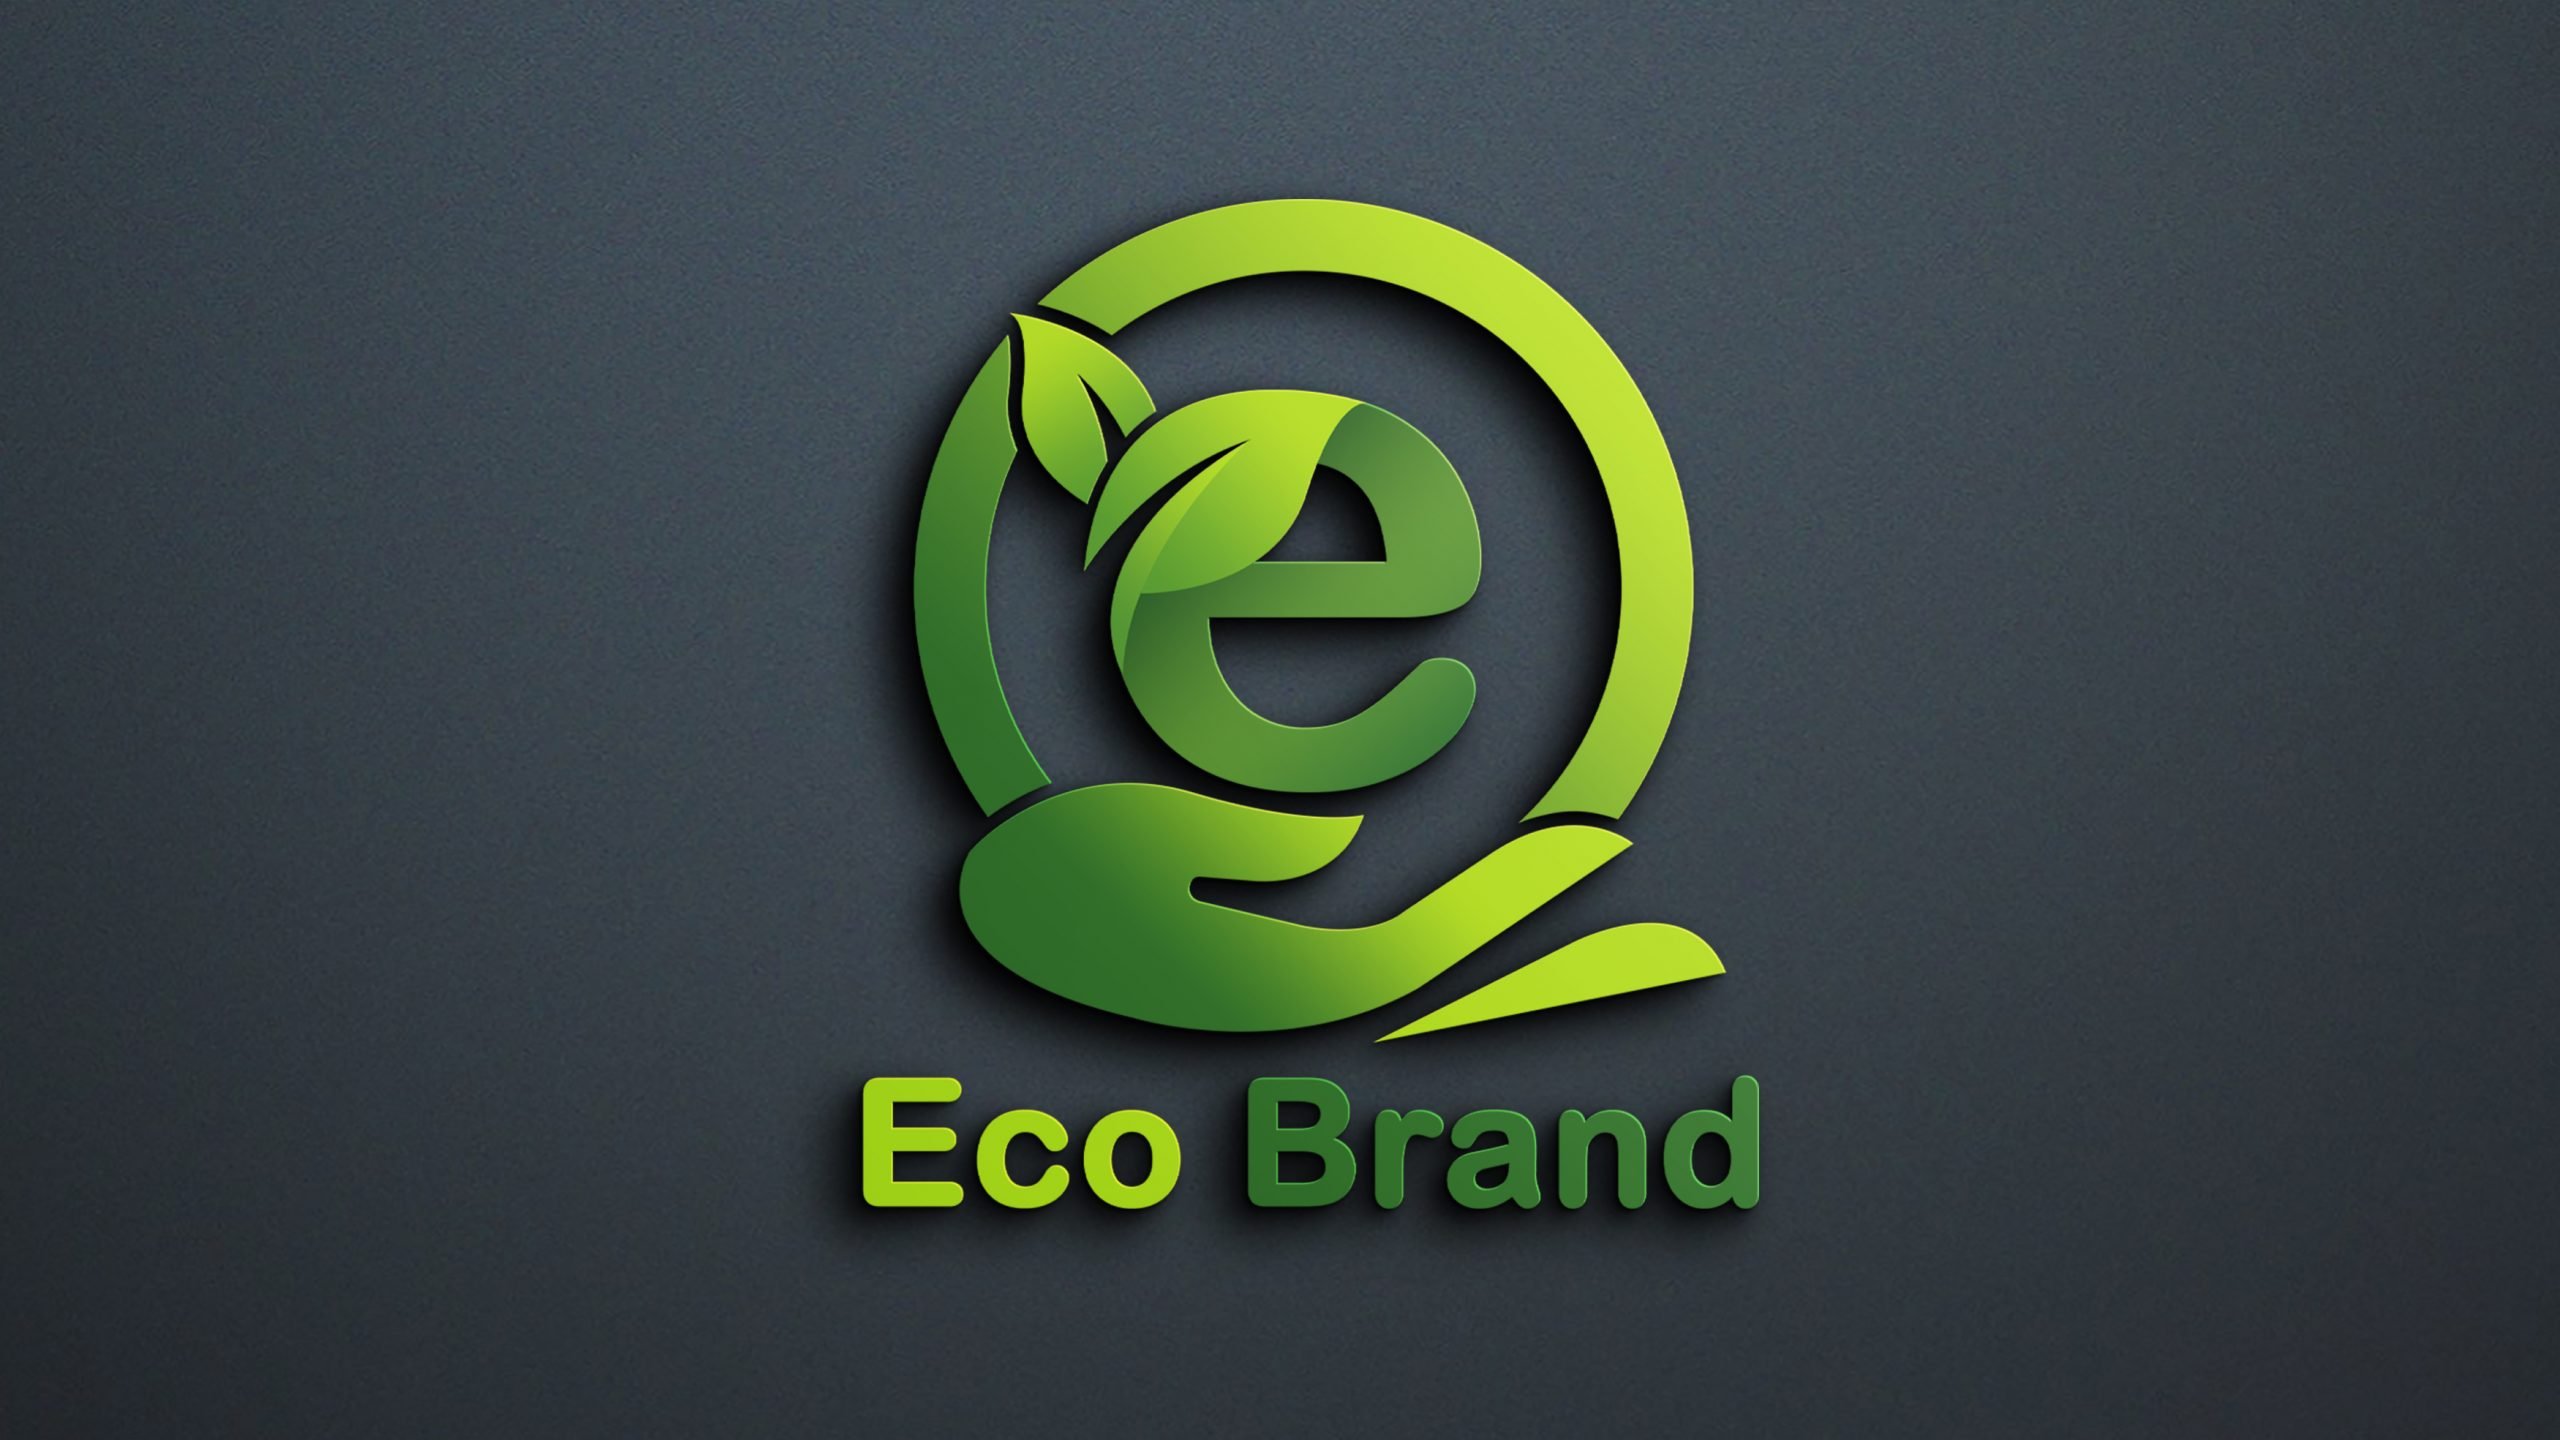 Eco logo templates green flat leaf sketch Vectors graphic art designs in  editable .ai .eps .svg .cdr format free and easy download unlimit id:6851637